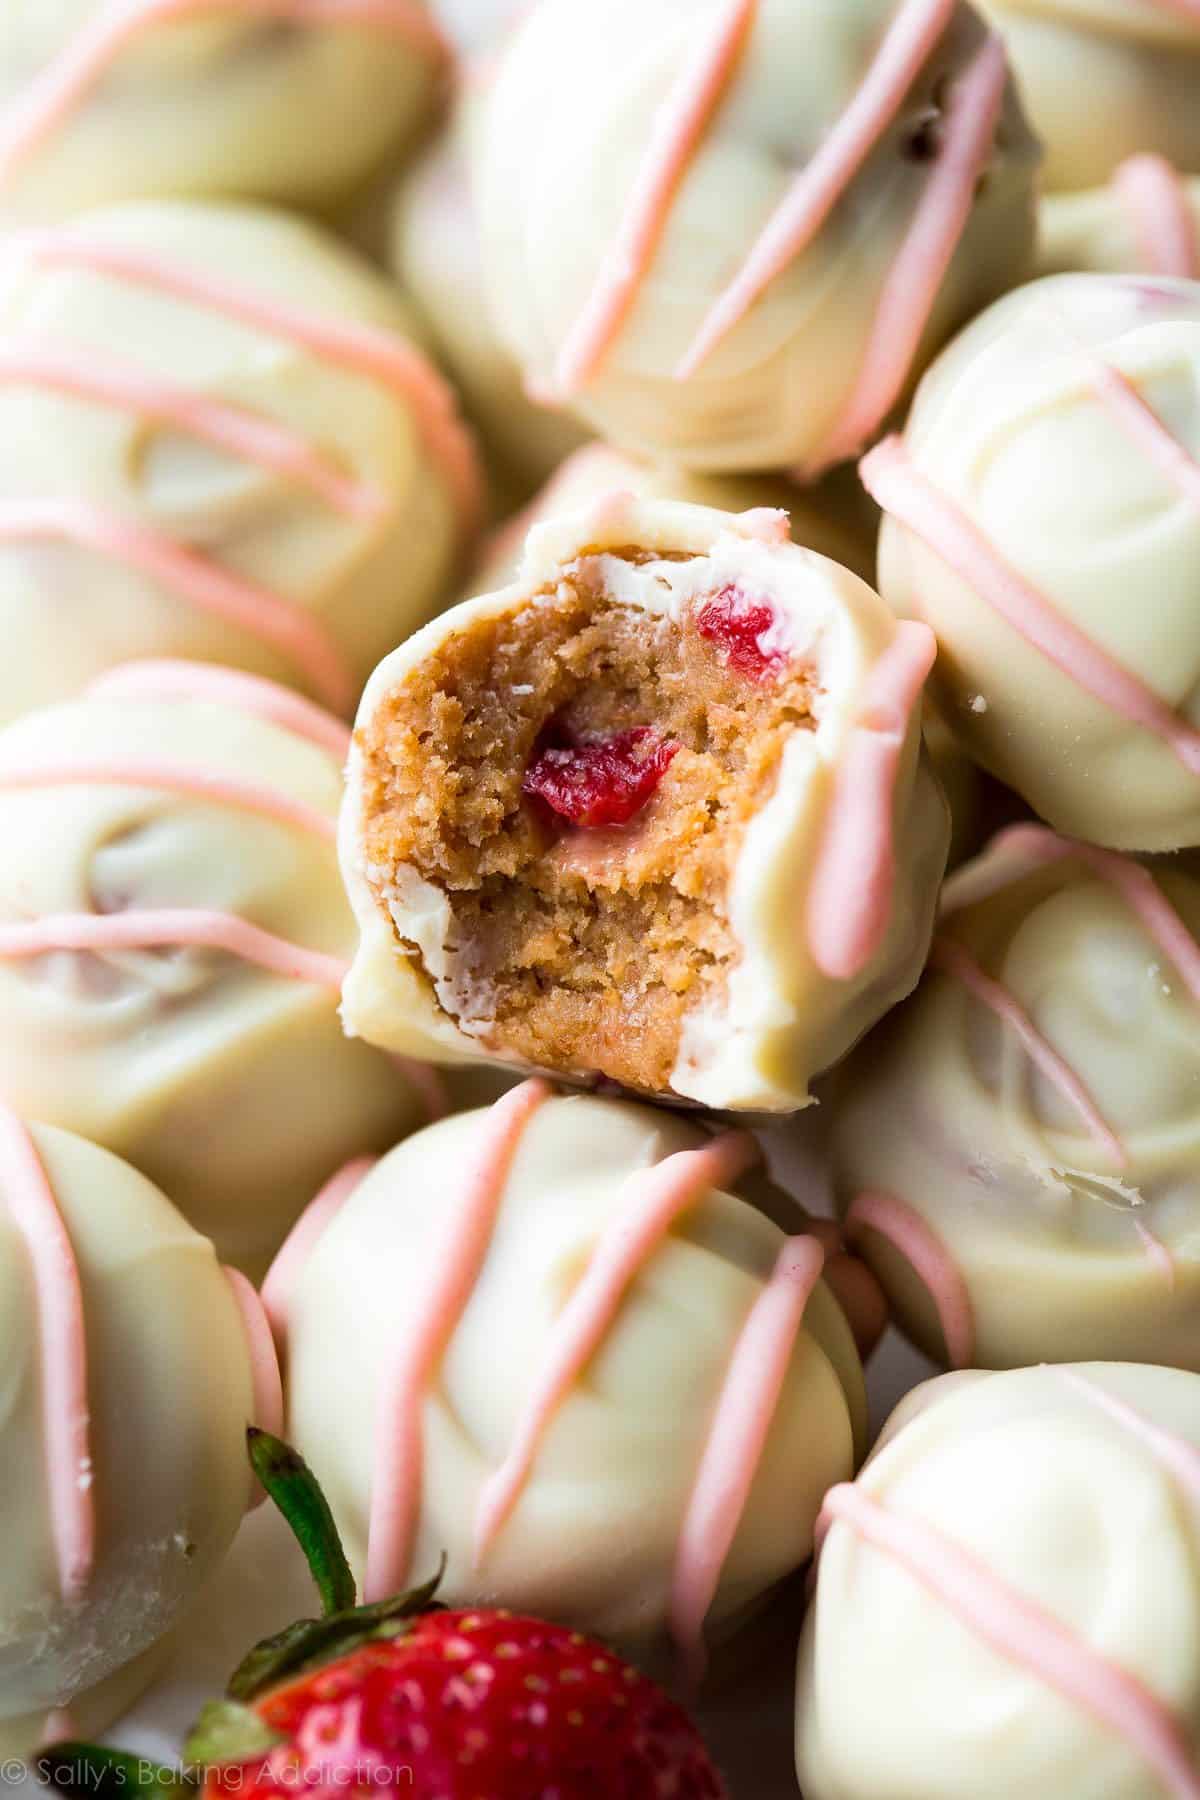 zoomed in image of strawberry cheesecake truffles with a bite out of one showing the inside